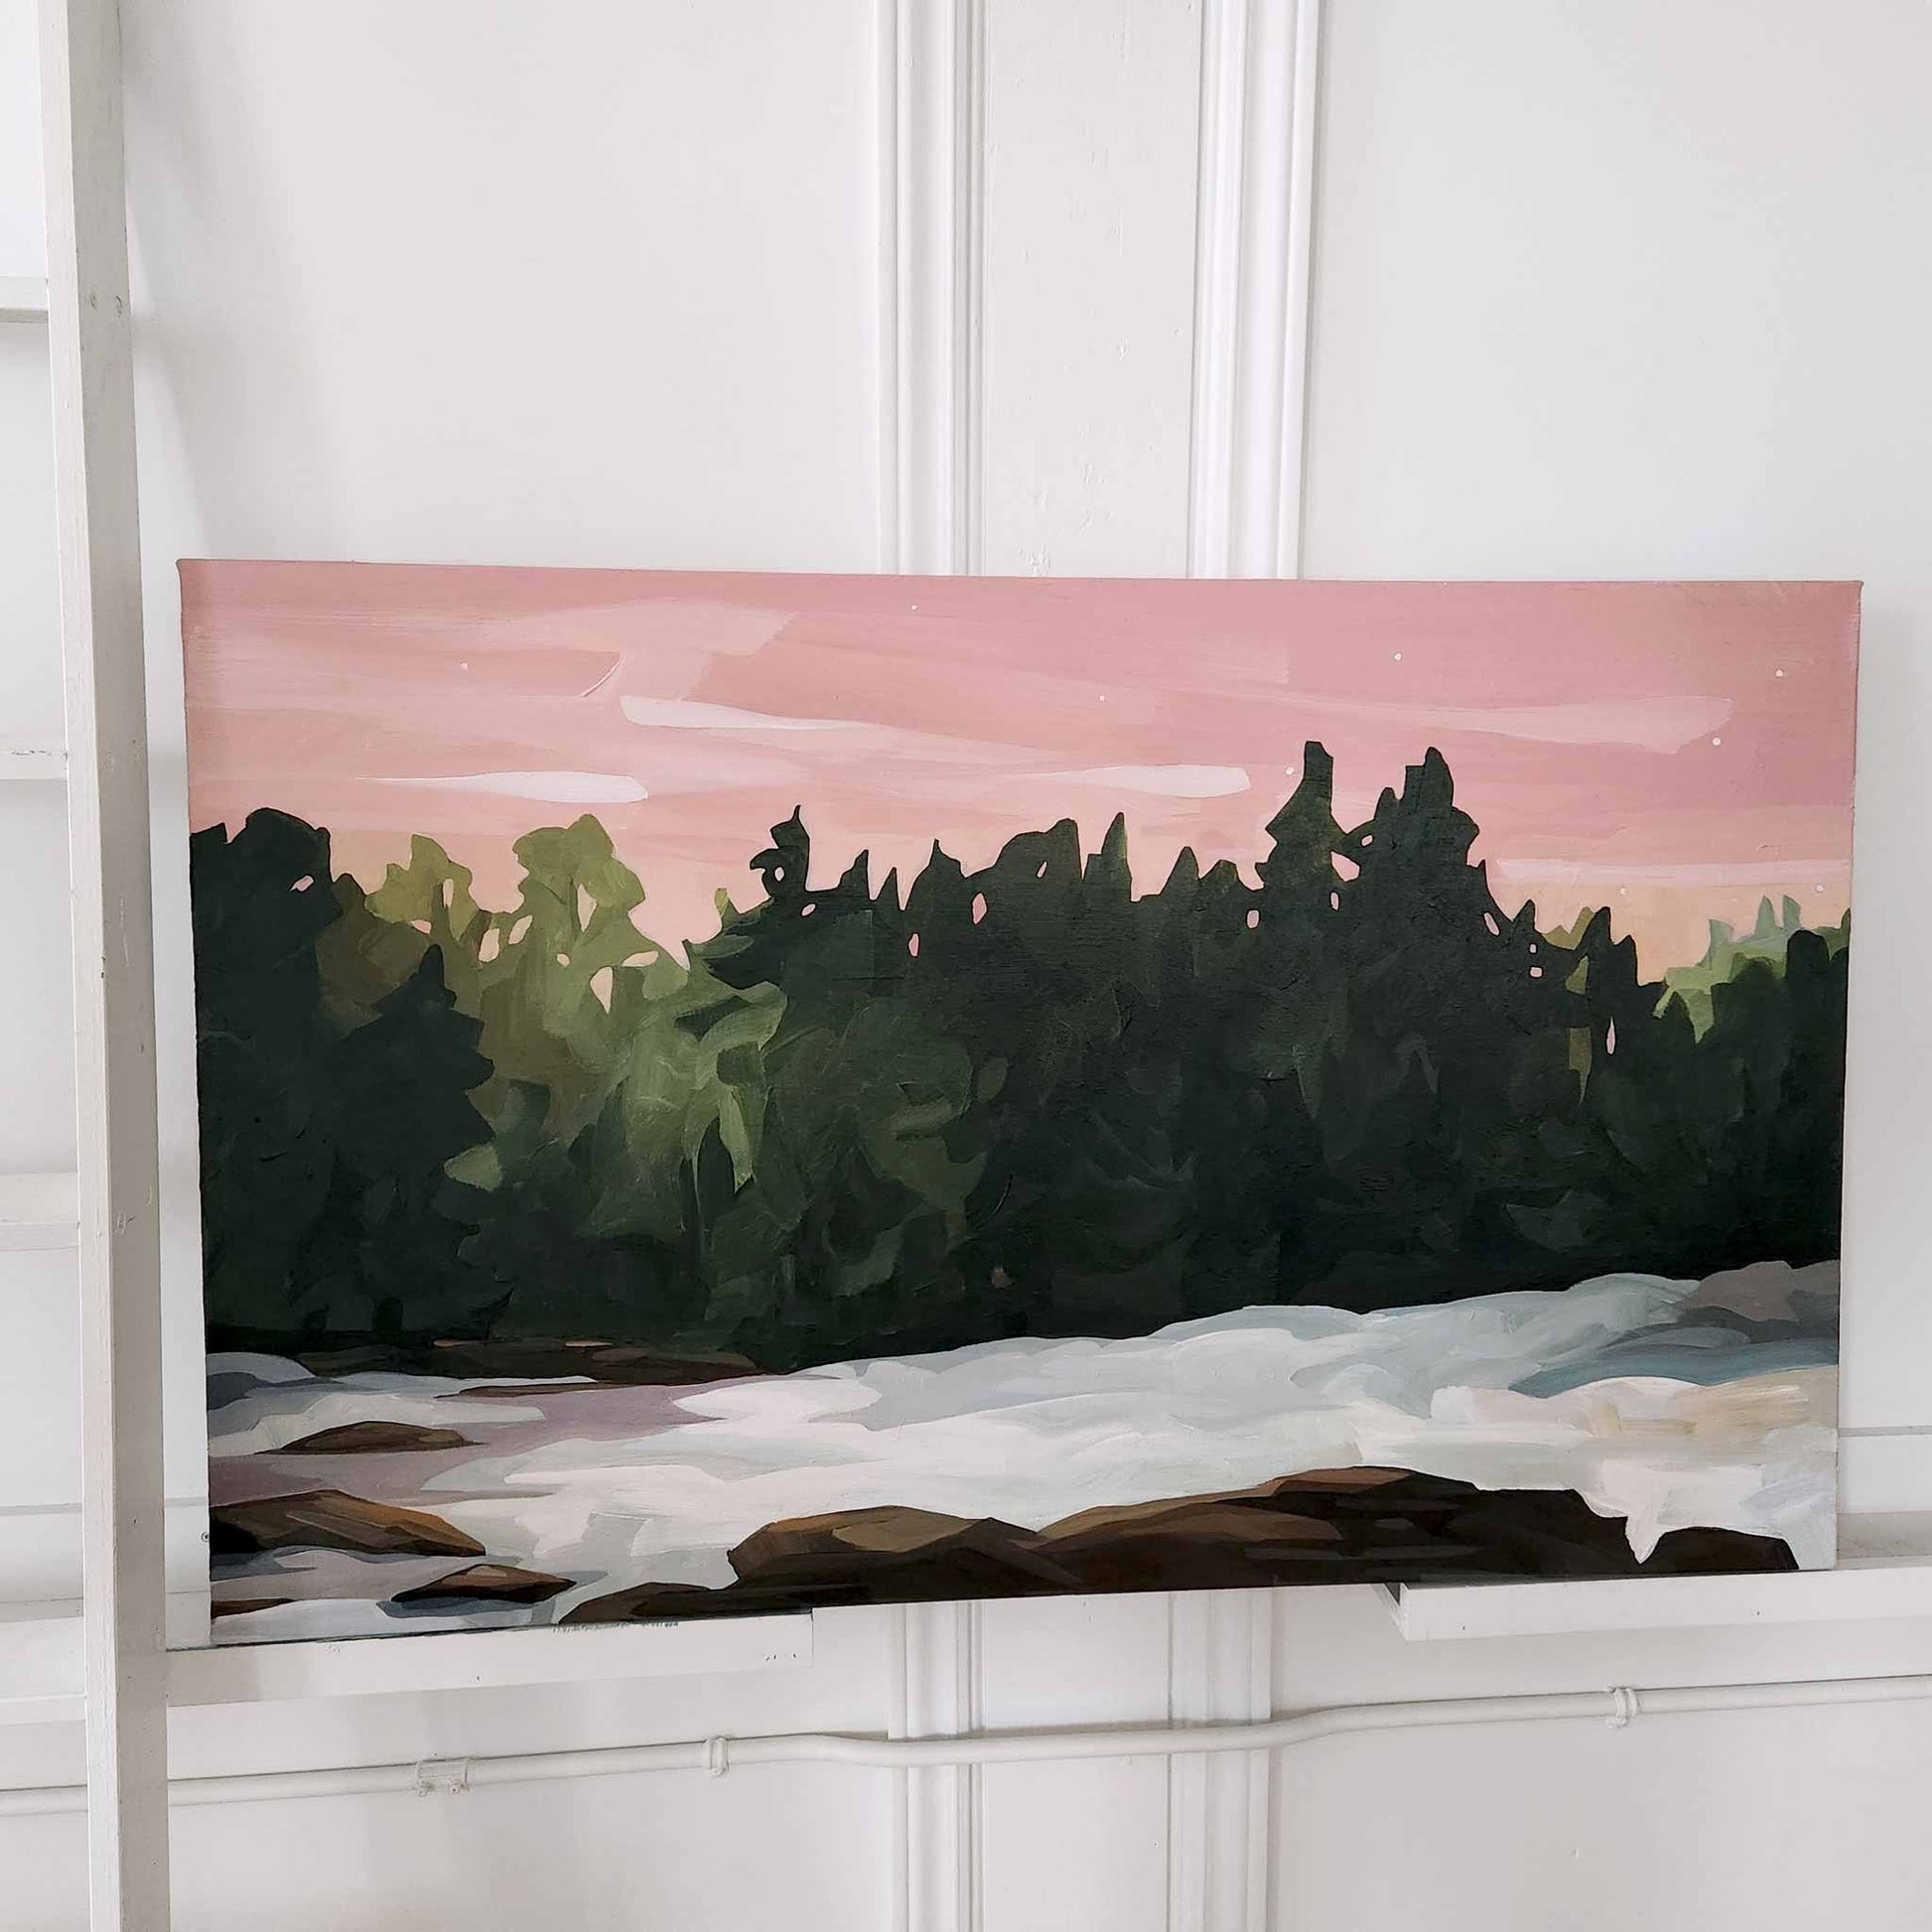 An acrylic landscape painting of a snowy forest scene where  light and shadows create depth and a pink sky adds a splash of colour